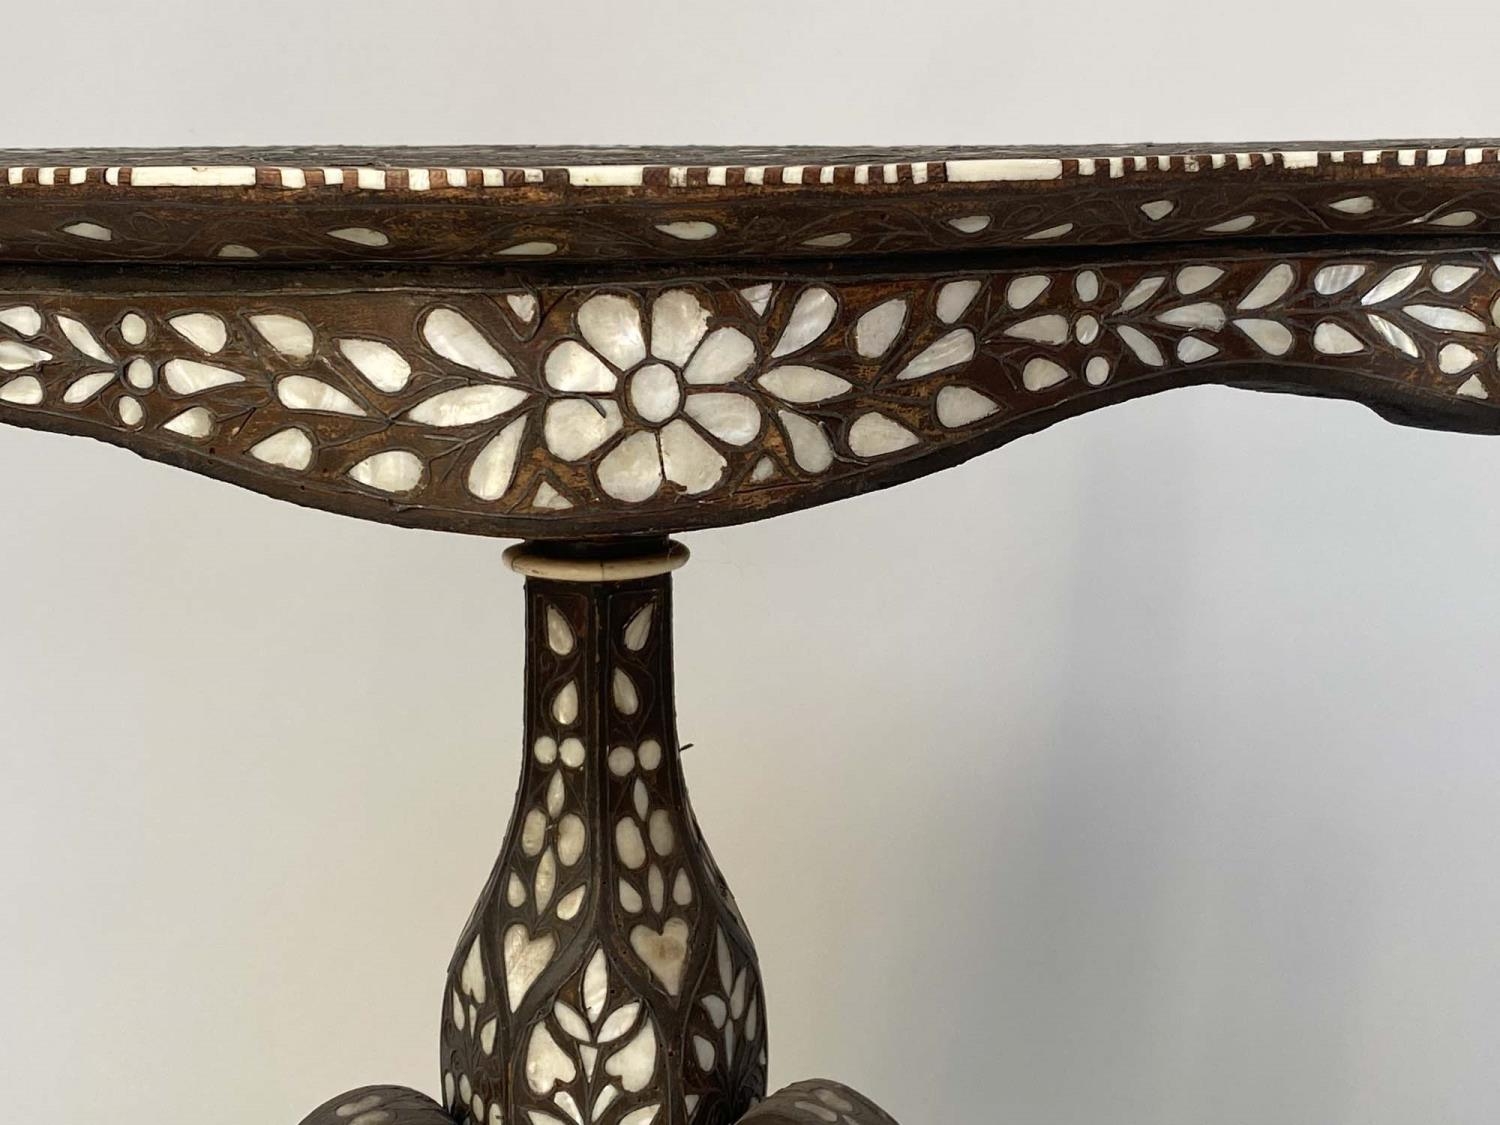 SYRIAN CENTRE TABLE, late 19th/early 20th century hardwood and allover bone, mother of pearl and - Image 5 of 6